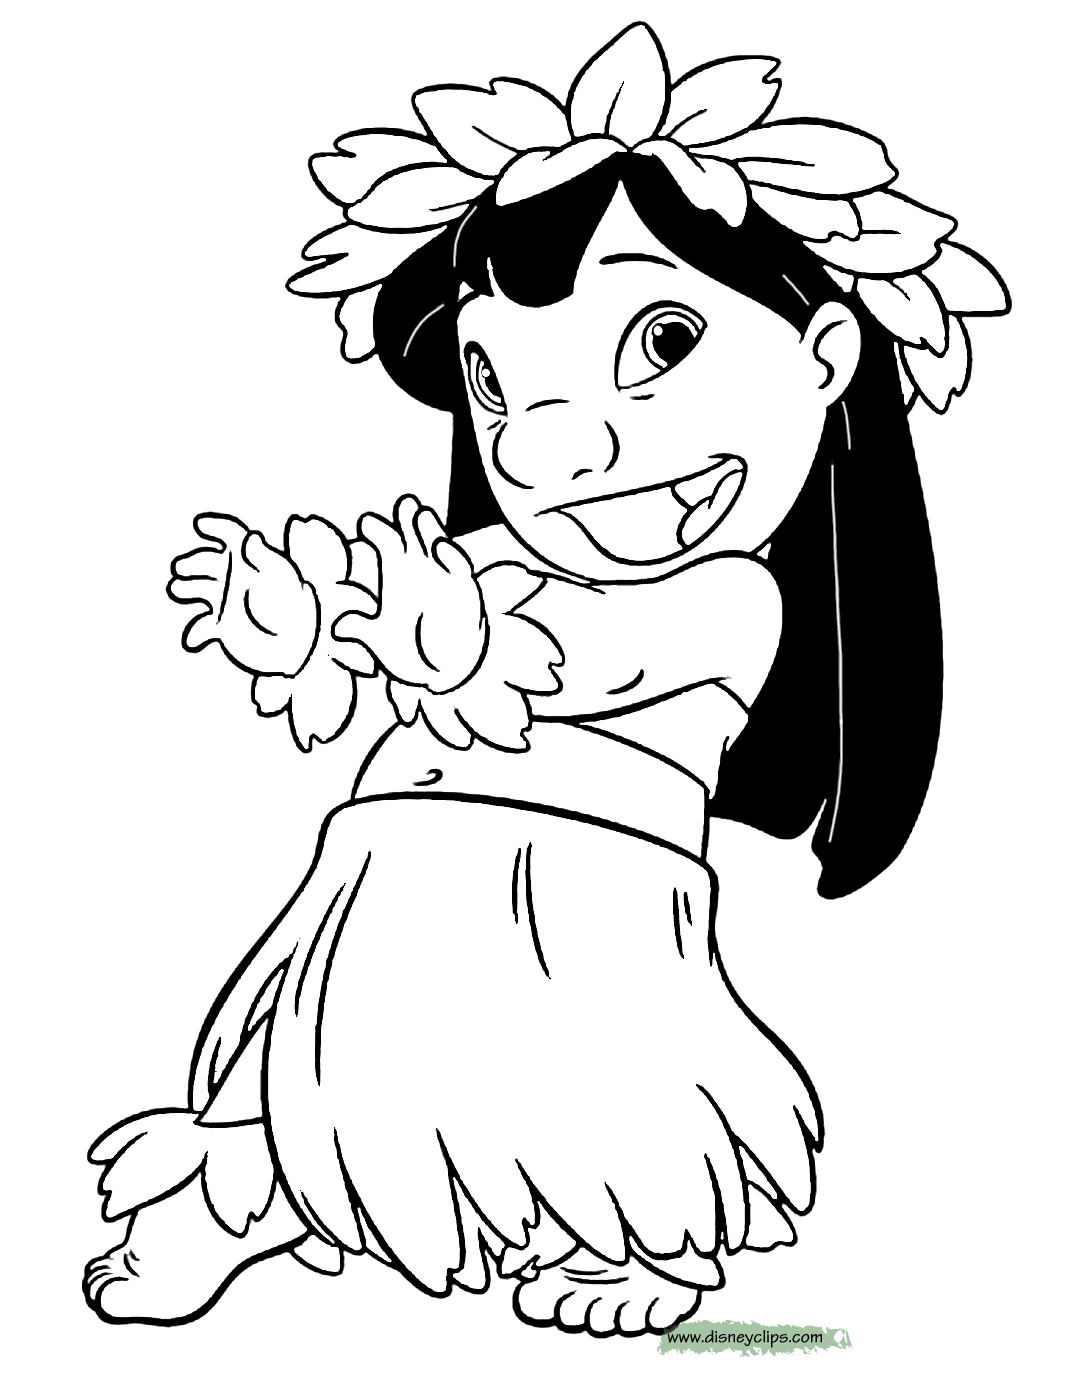 Lilo and Stitch Printable Coloring Pages 2 | Disney Coloring Book